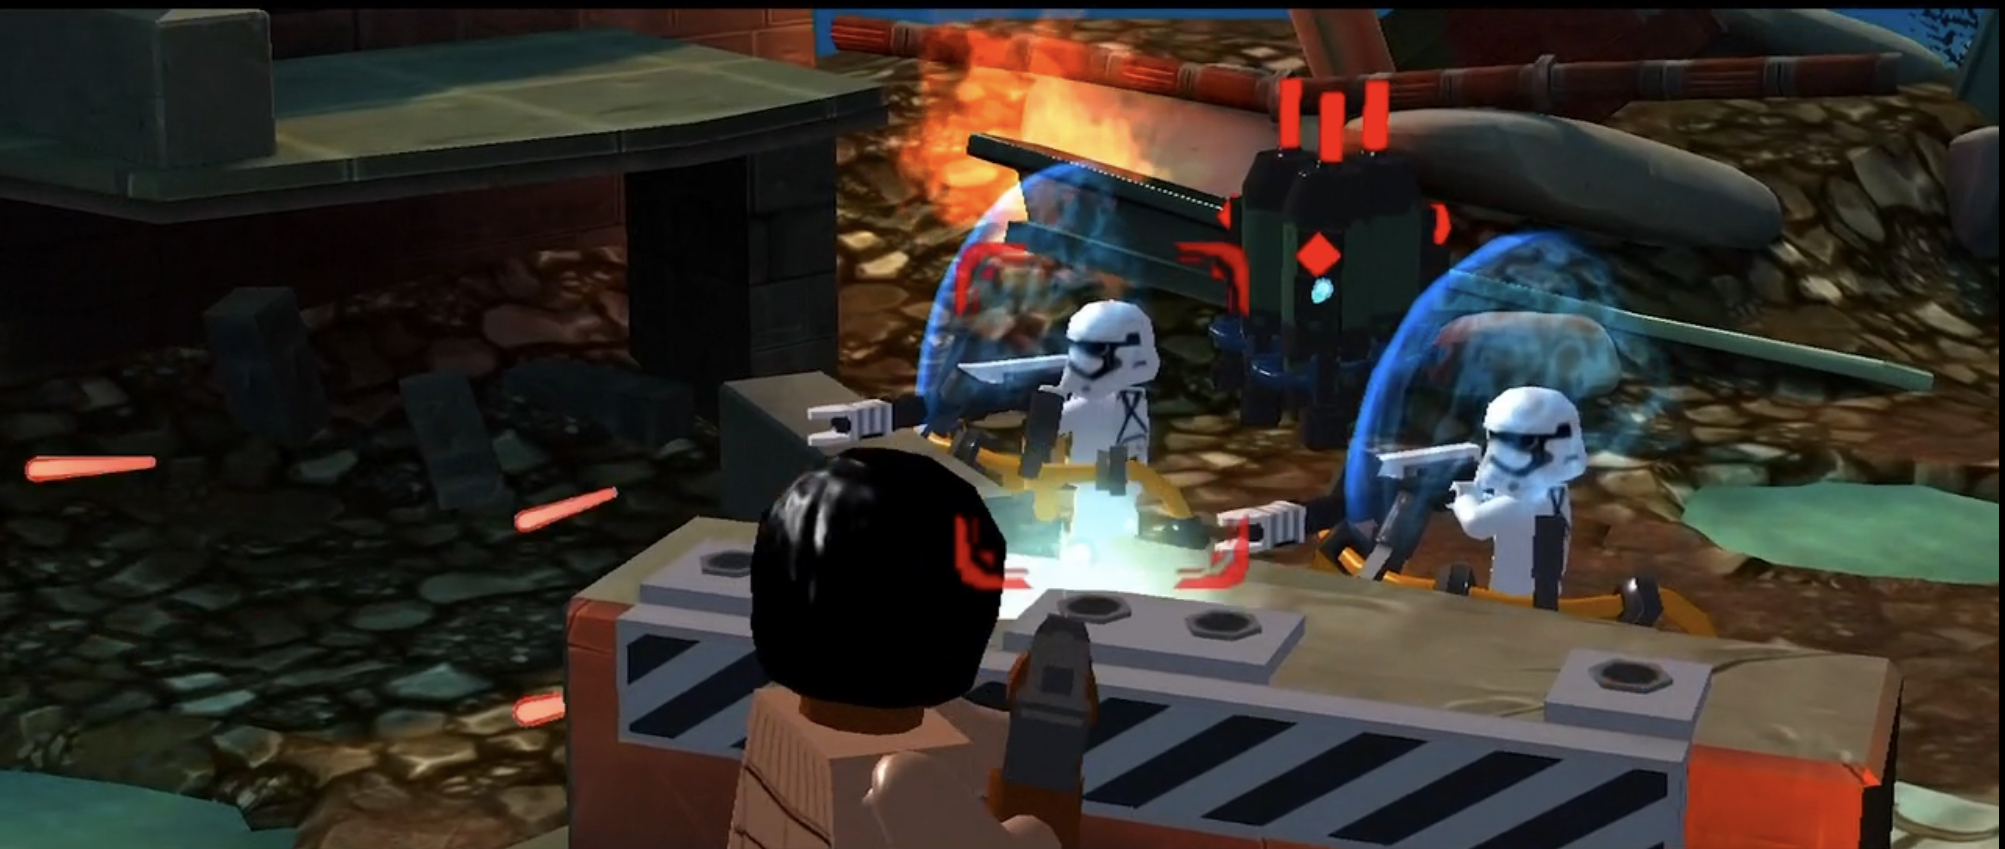 Best Star Wars Games For Iphone And Ipad In 2020 Imore - first ad for jedi roblox